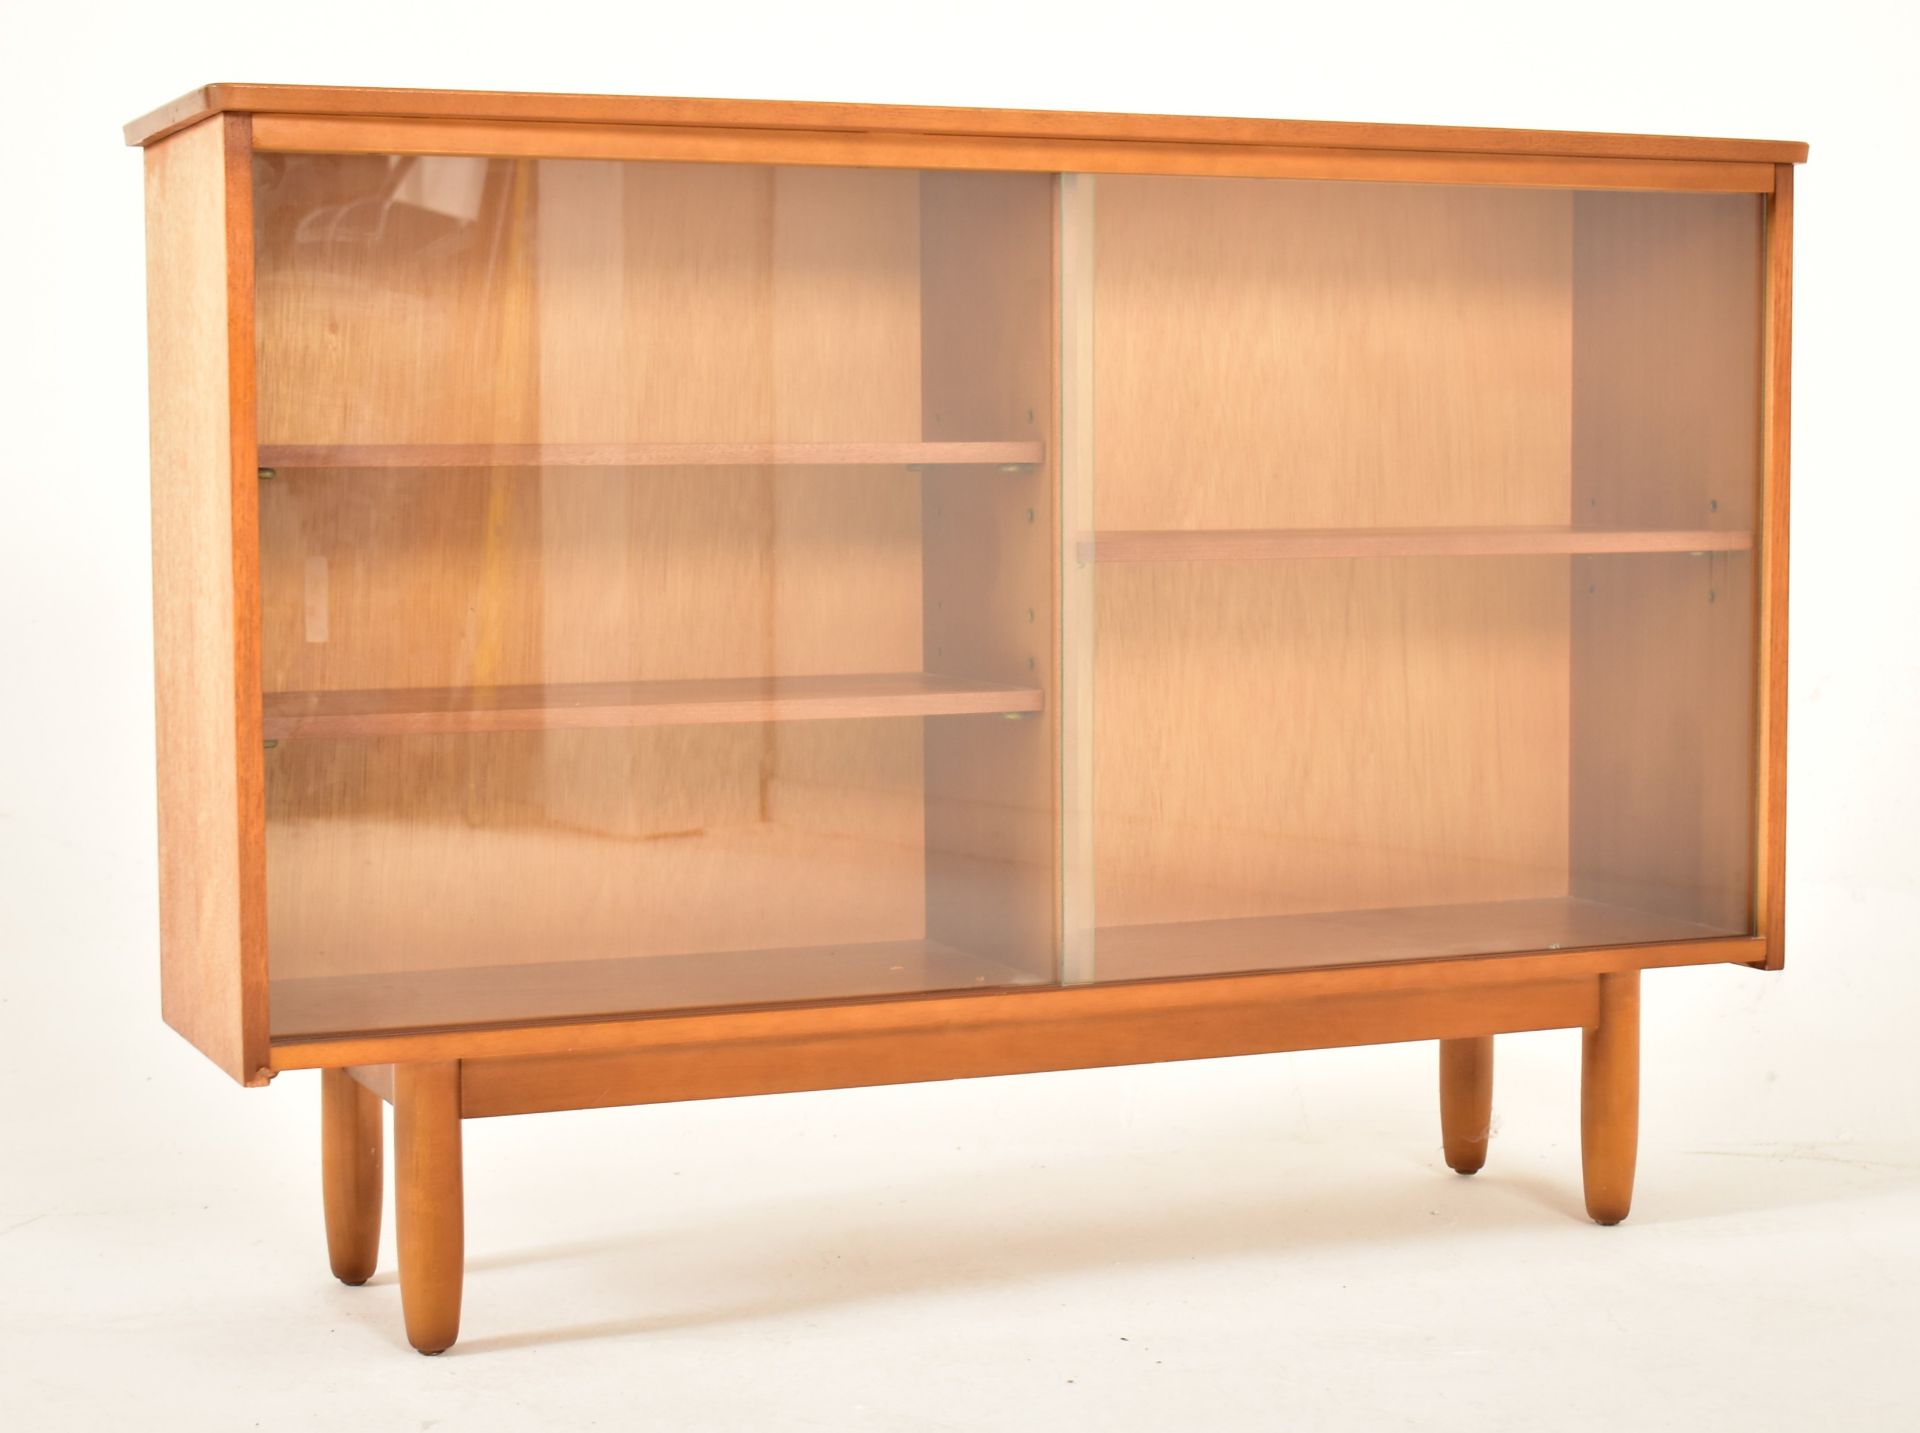 MID CENTURY TEAK AND GLASS DISPLAY CABINET / BOOKCASE